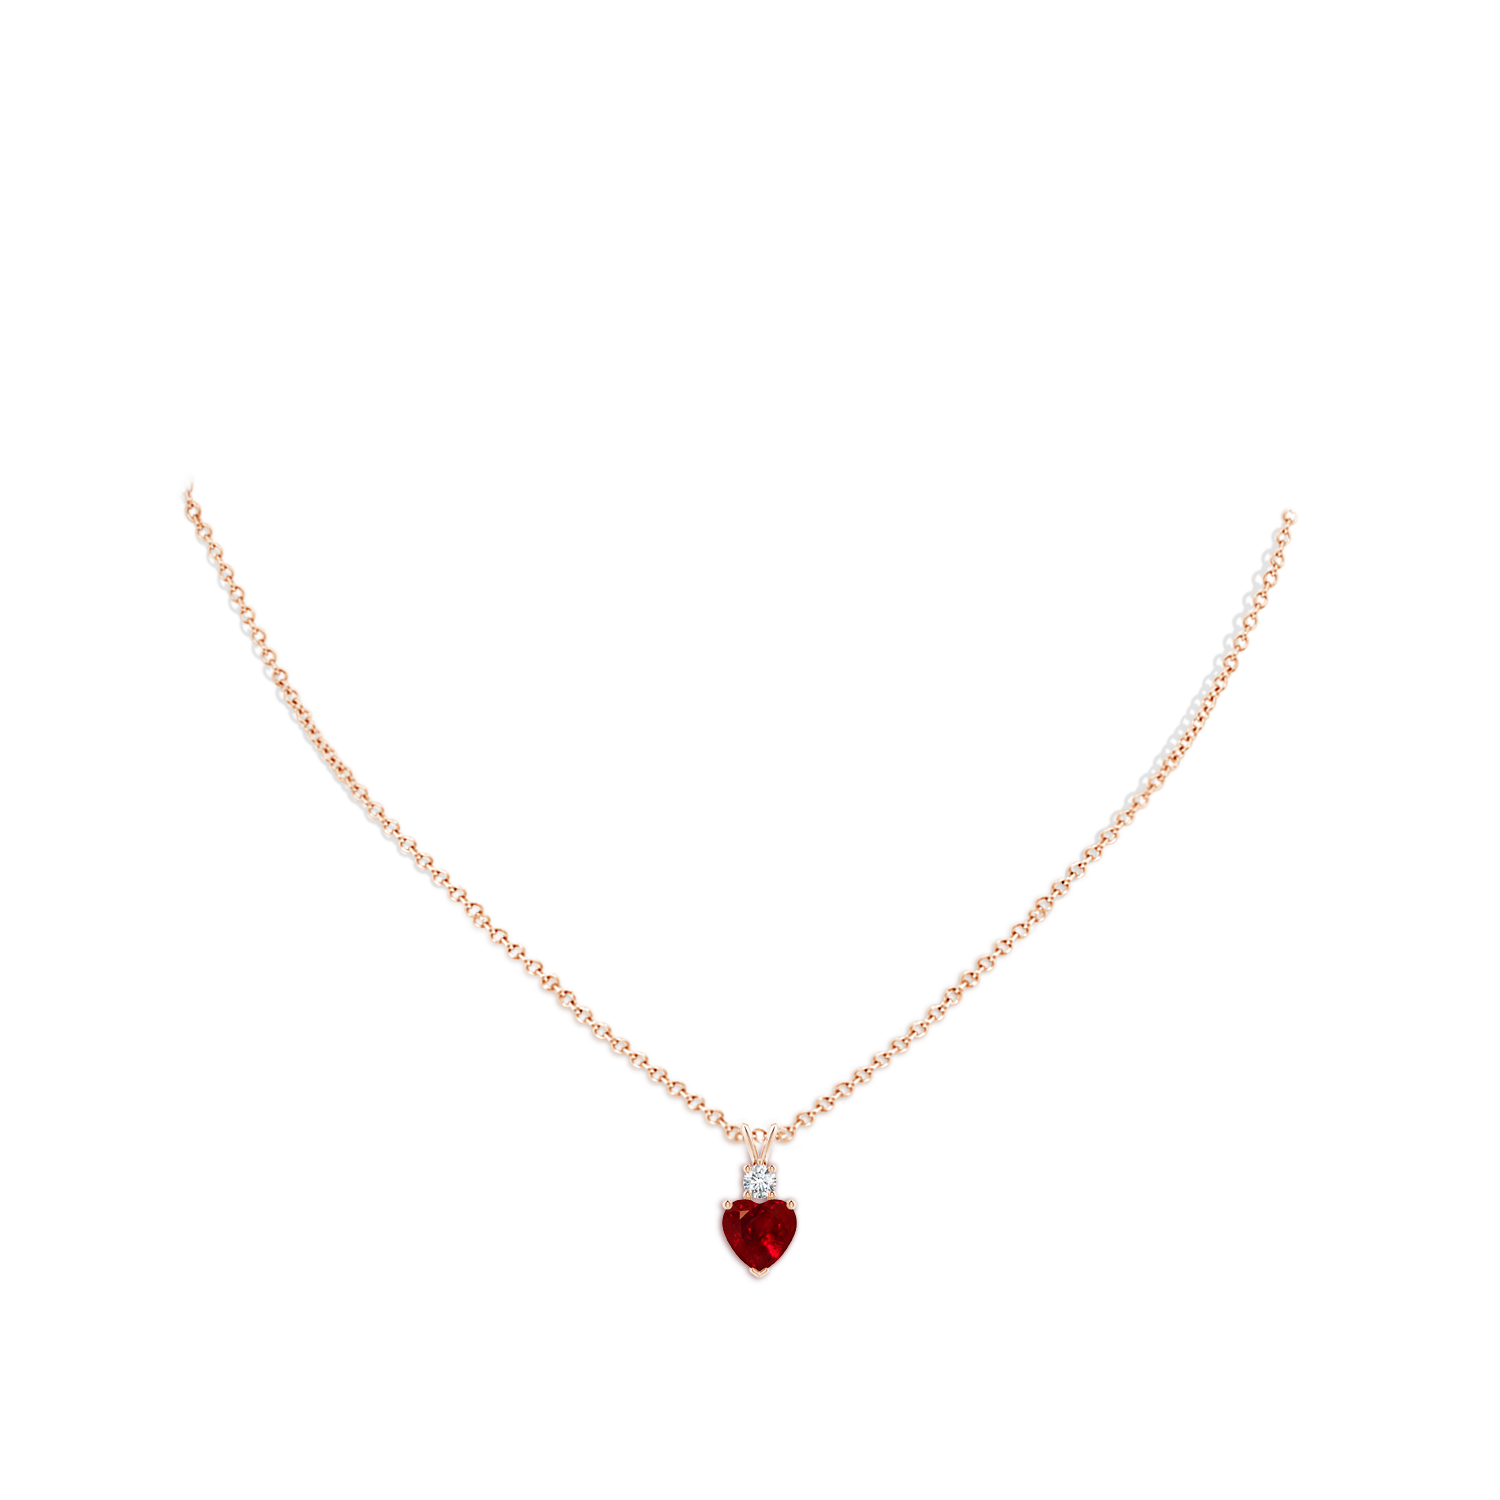 AAAA - Ruby / 1.8 CT / 14 KT Rose Gold